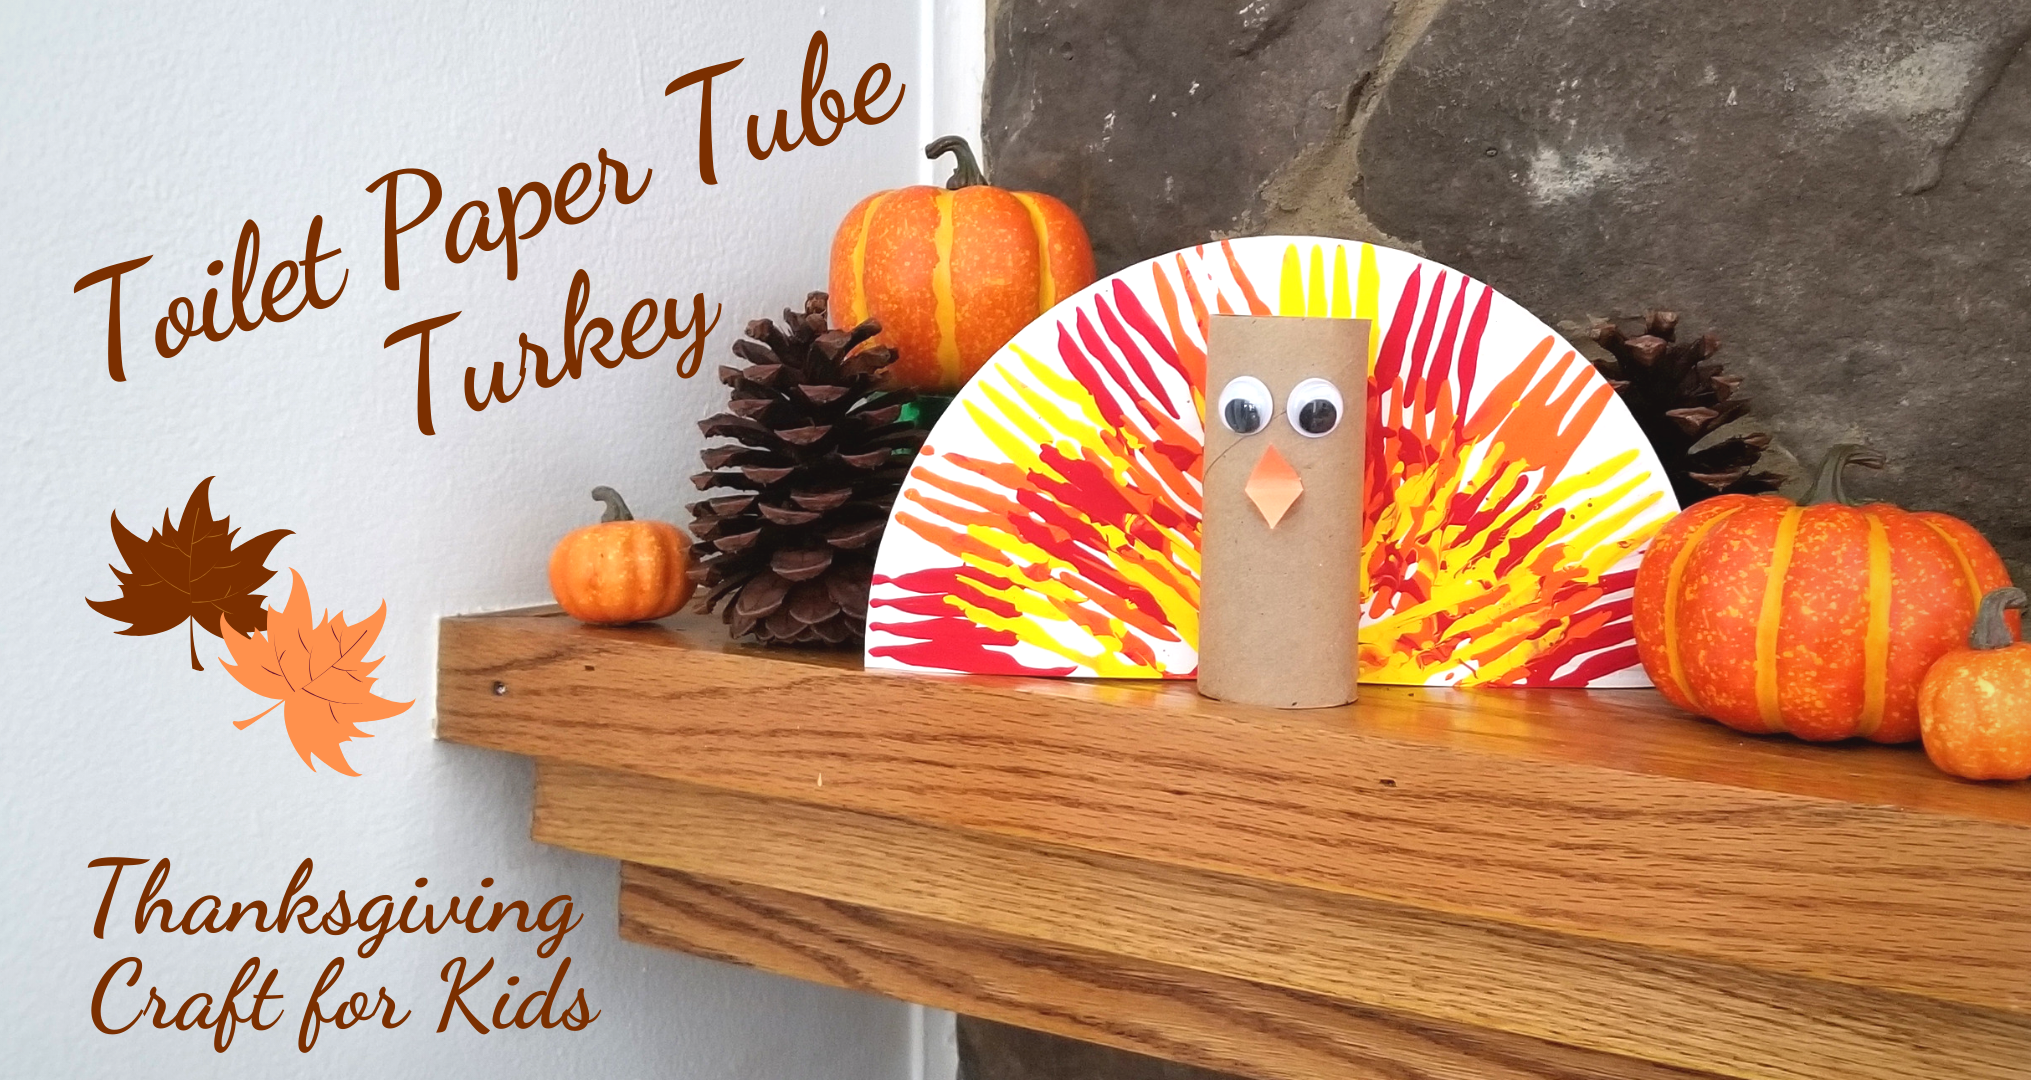 Cotton Ball Painted Paper Plate Thanksgiving Turkey Craft